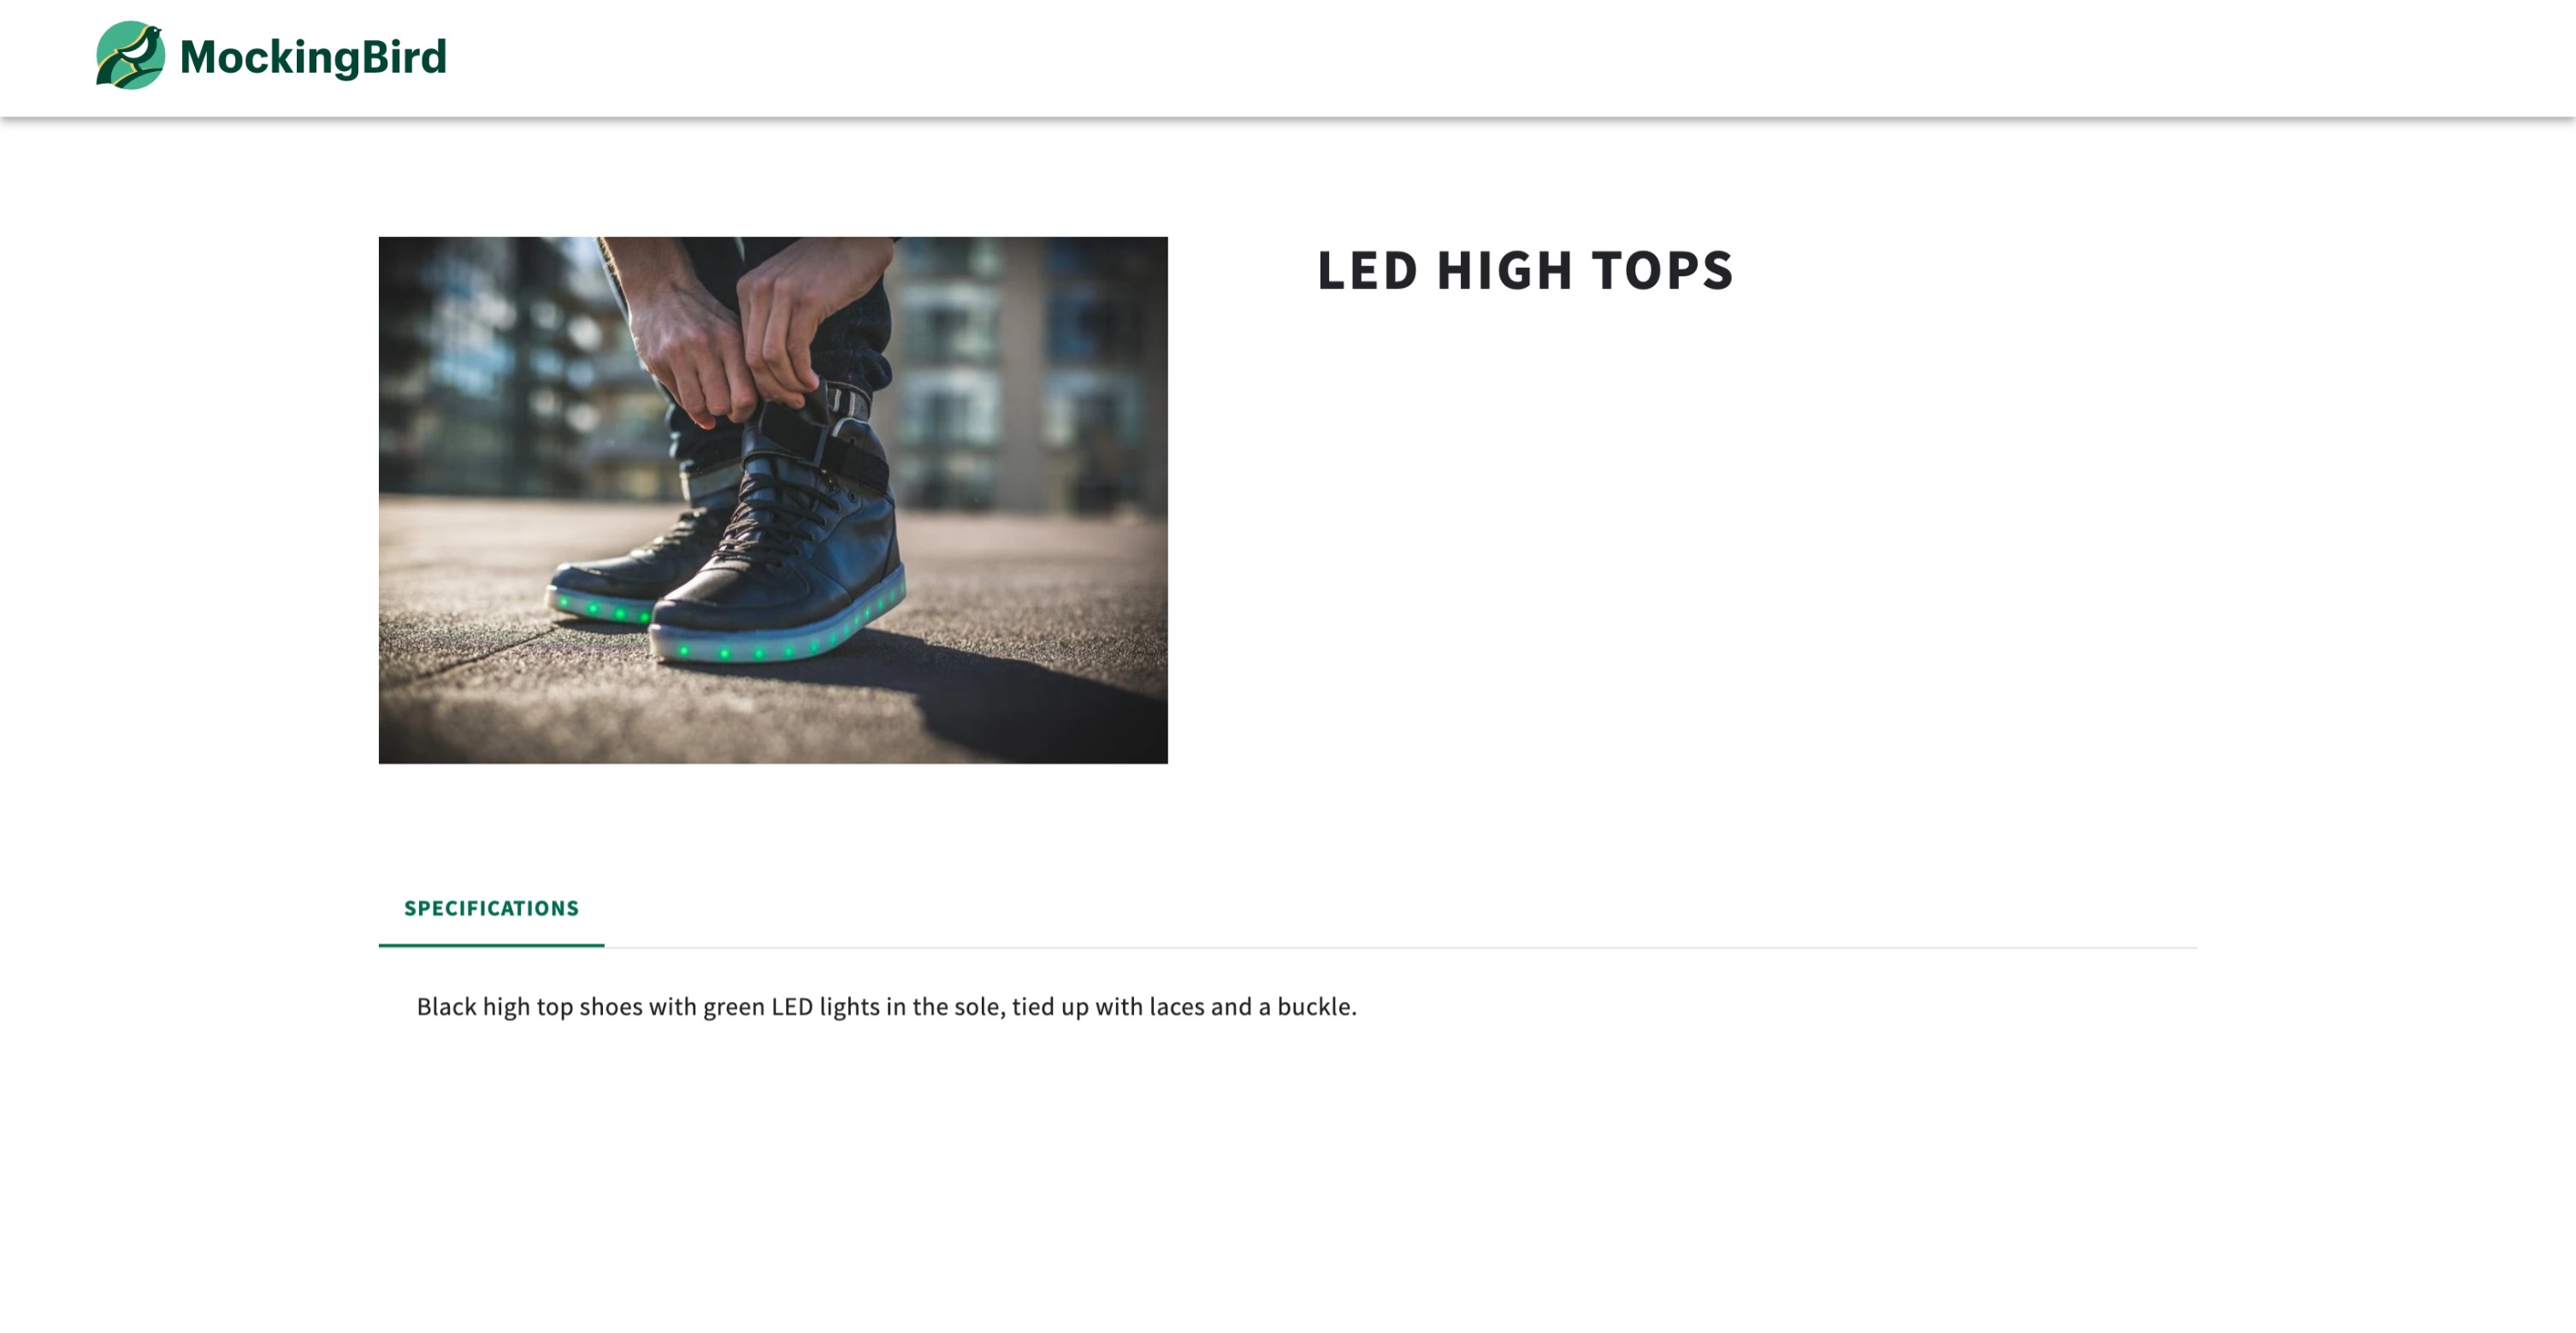 An image of the product page featuring LED high tops and a specifications tab with a product description